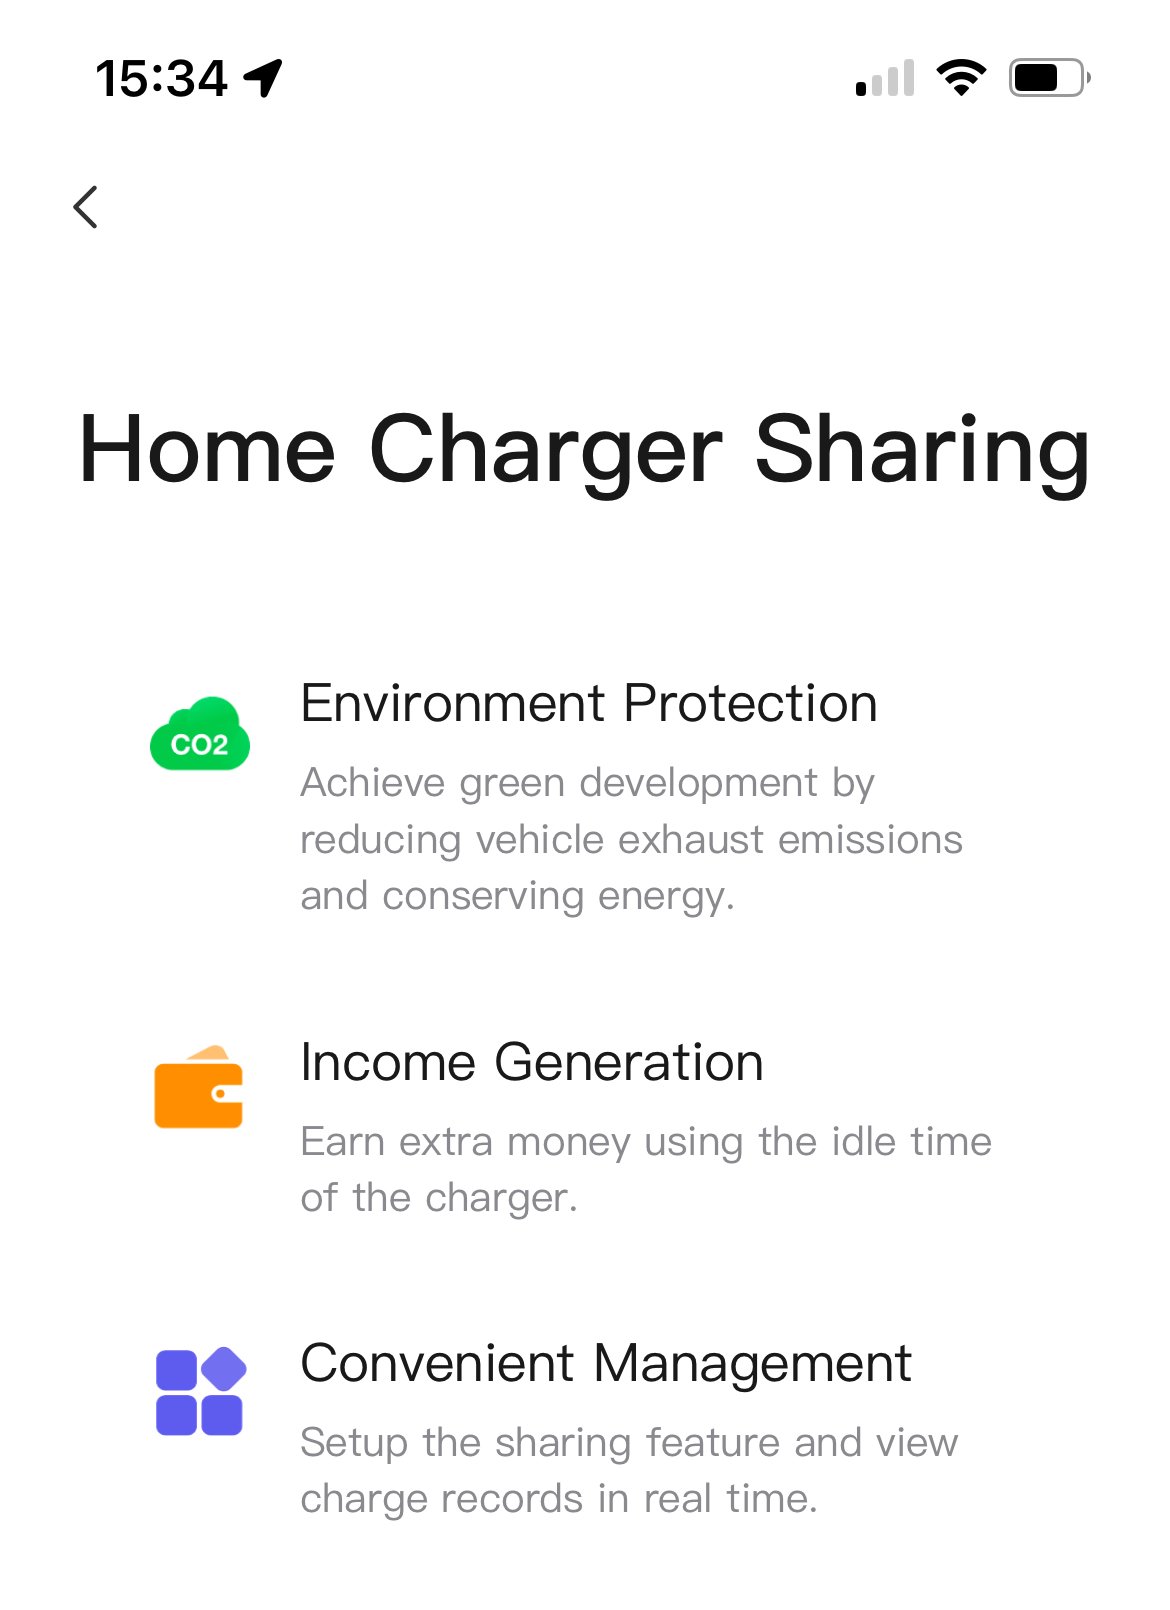 Home charger sharing screen in app